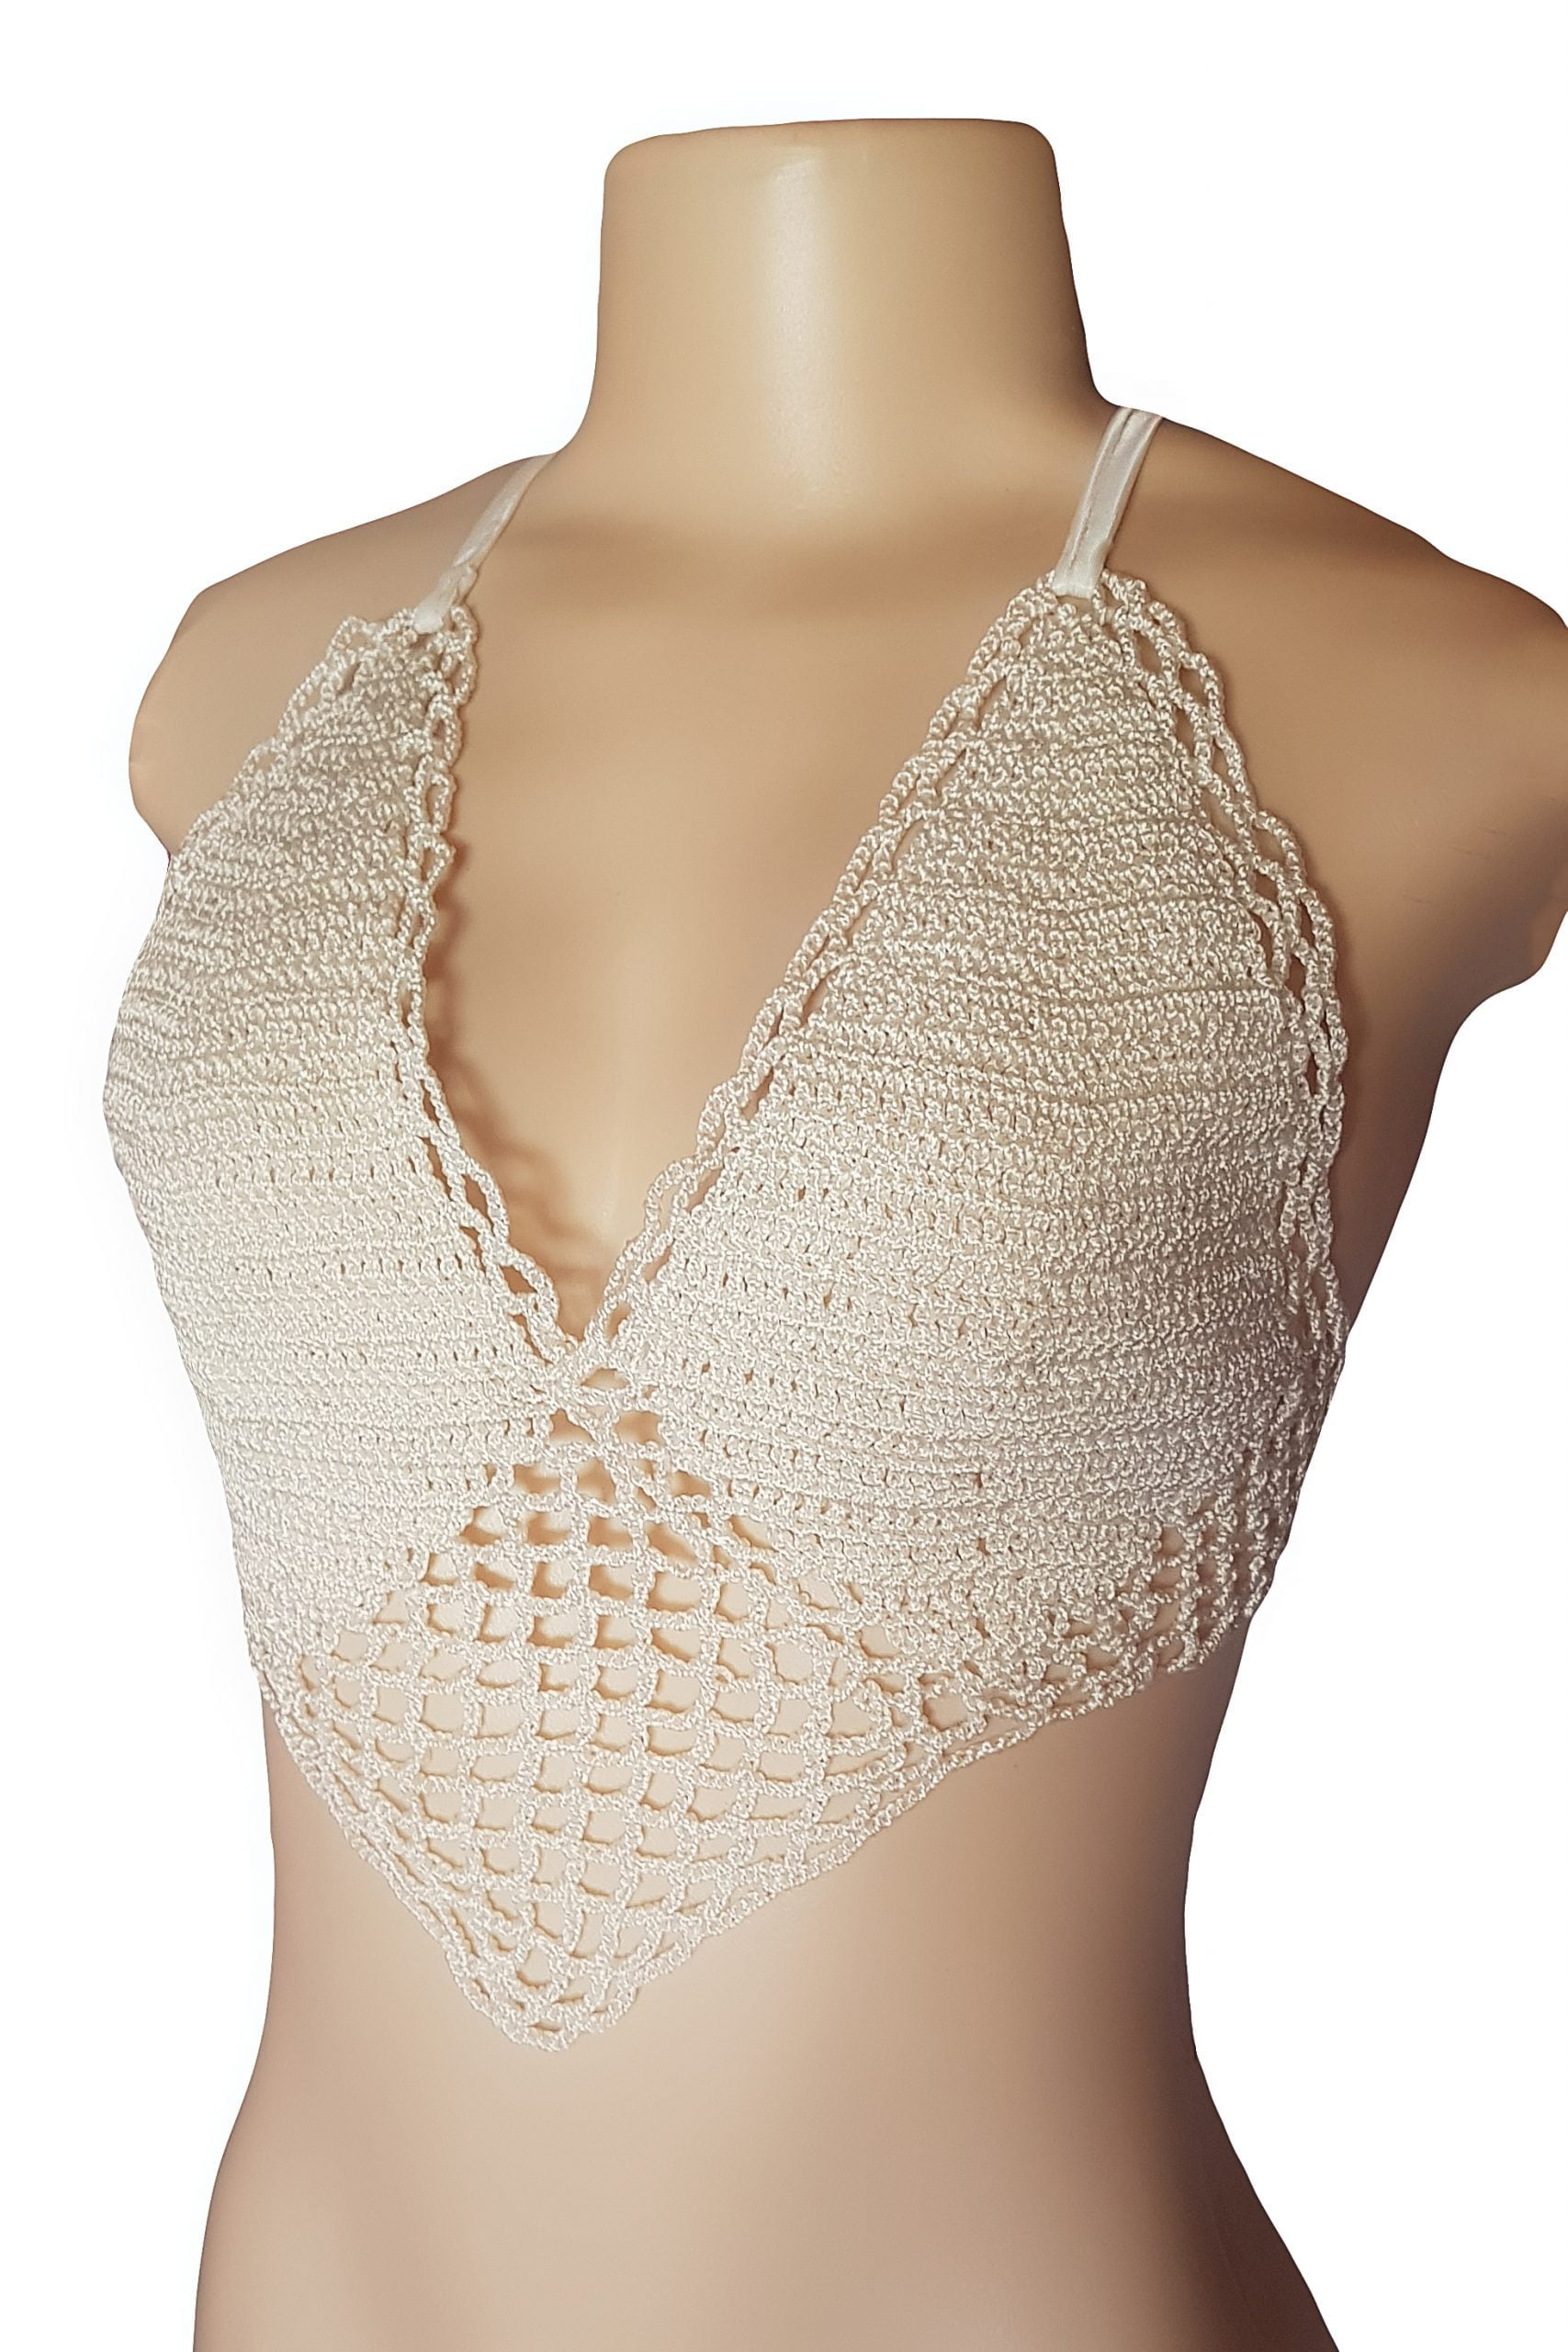 Pearl crochet sexy crop top, with open back 8 this crochet top was created with attention to detail. Handmade top in order to create a unique one of a kind clothing item. It is perfect for several sizes as you can tie-up the back looser or tighter for a perfect fit. A great crochet top with a slight shine inspired by the warm sun of spring. Great as a casual top or with smart pants or a skirt, accessories and shoes for a more smart casual occasion